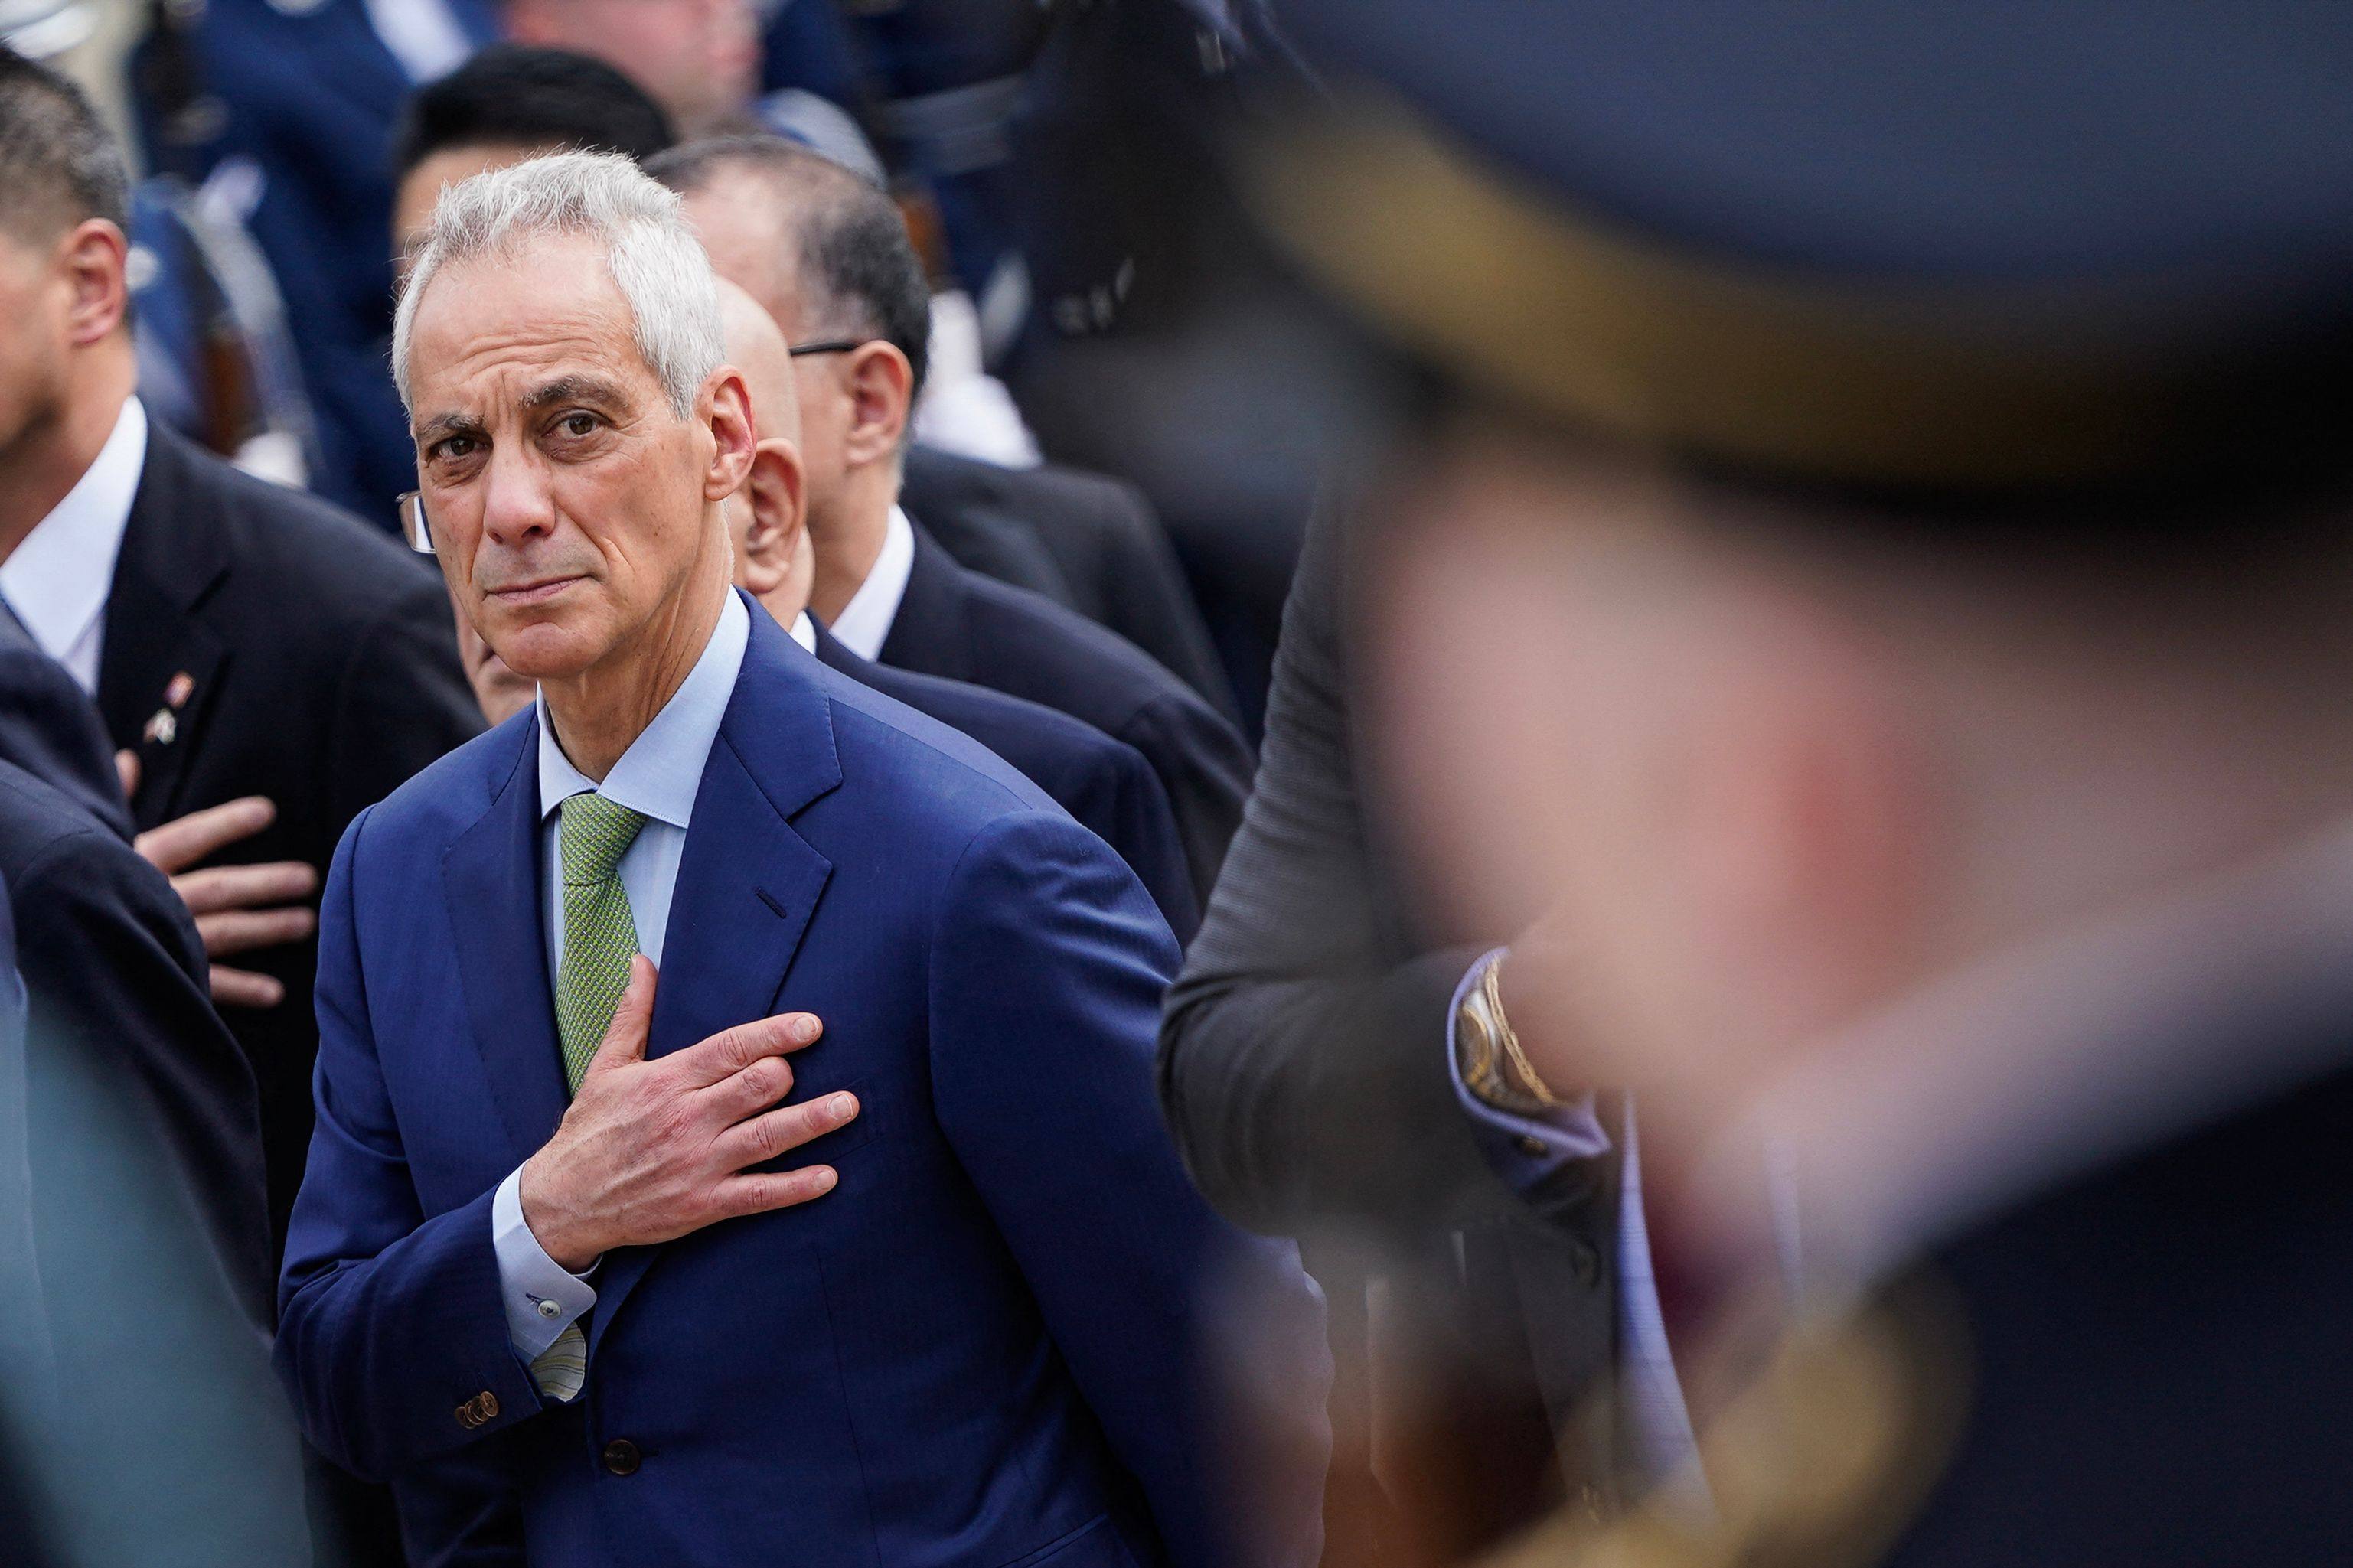 US Ambassador to Japan Rahm Emanuel attends a wreath-laying ceremony by Japan’s Prime Minister Fumio Kishida at Arlington National Cemetery in the US on Tuesday. Photo: AFP